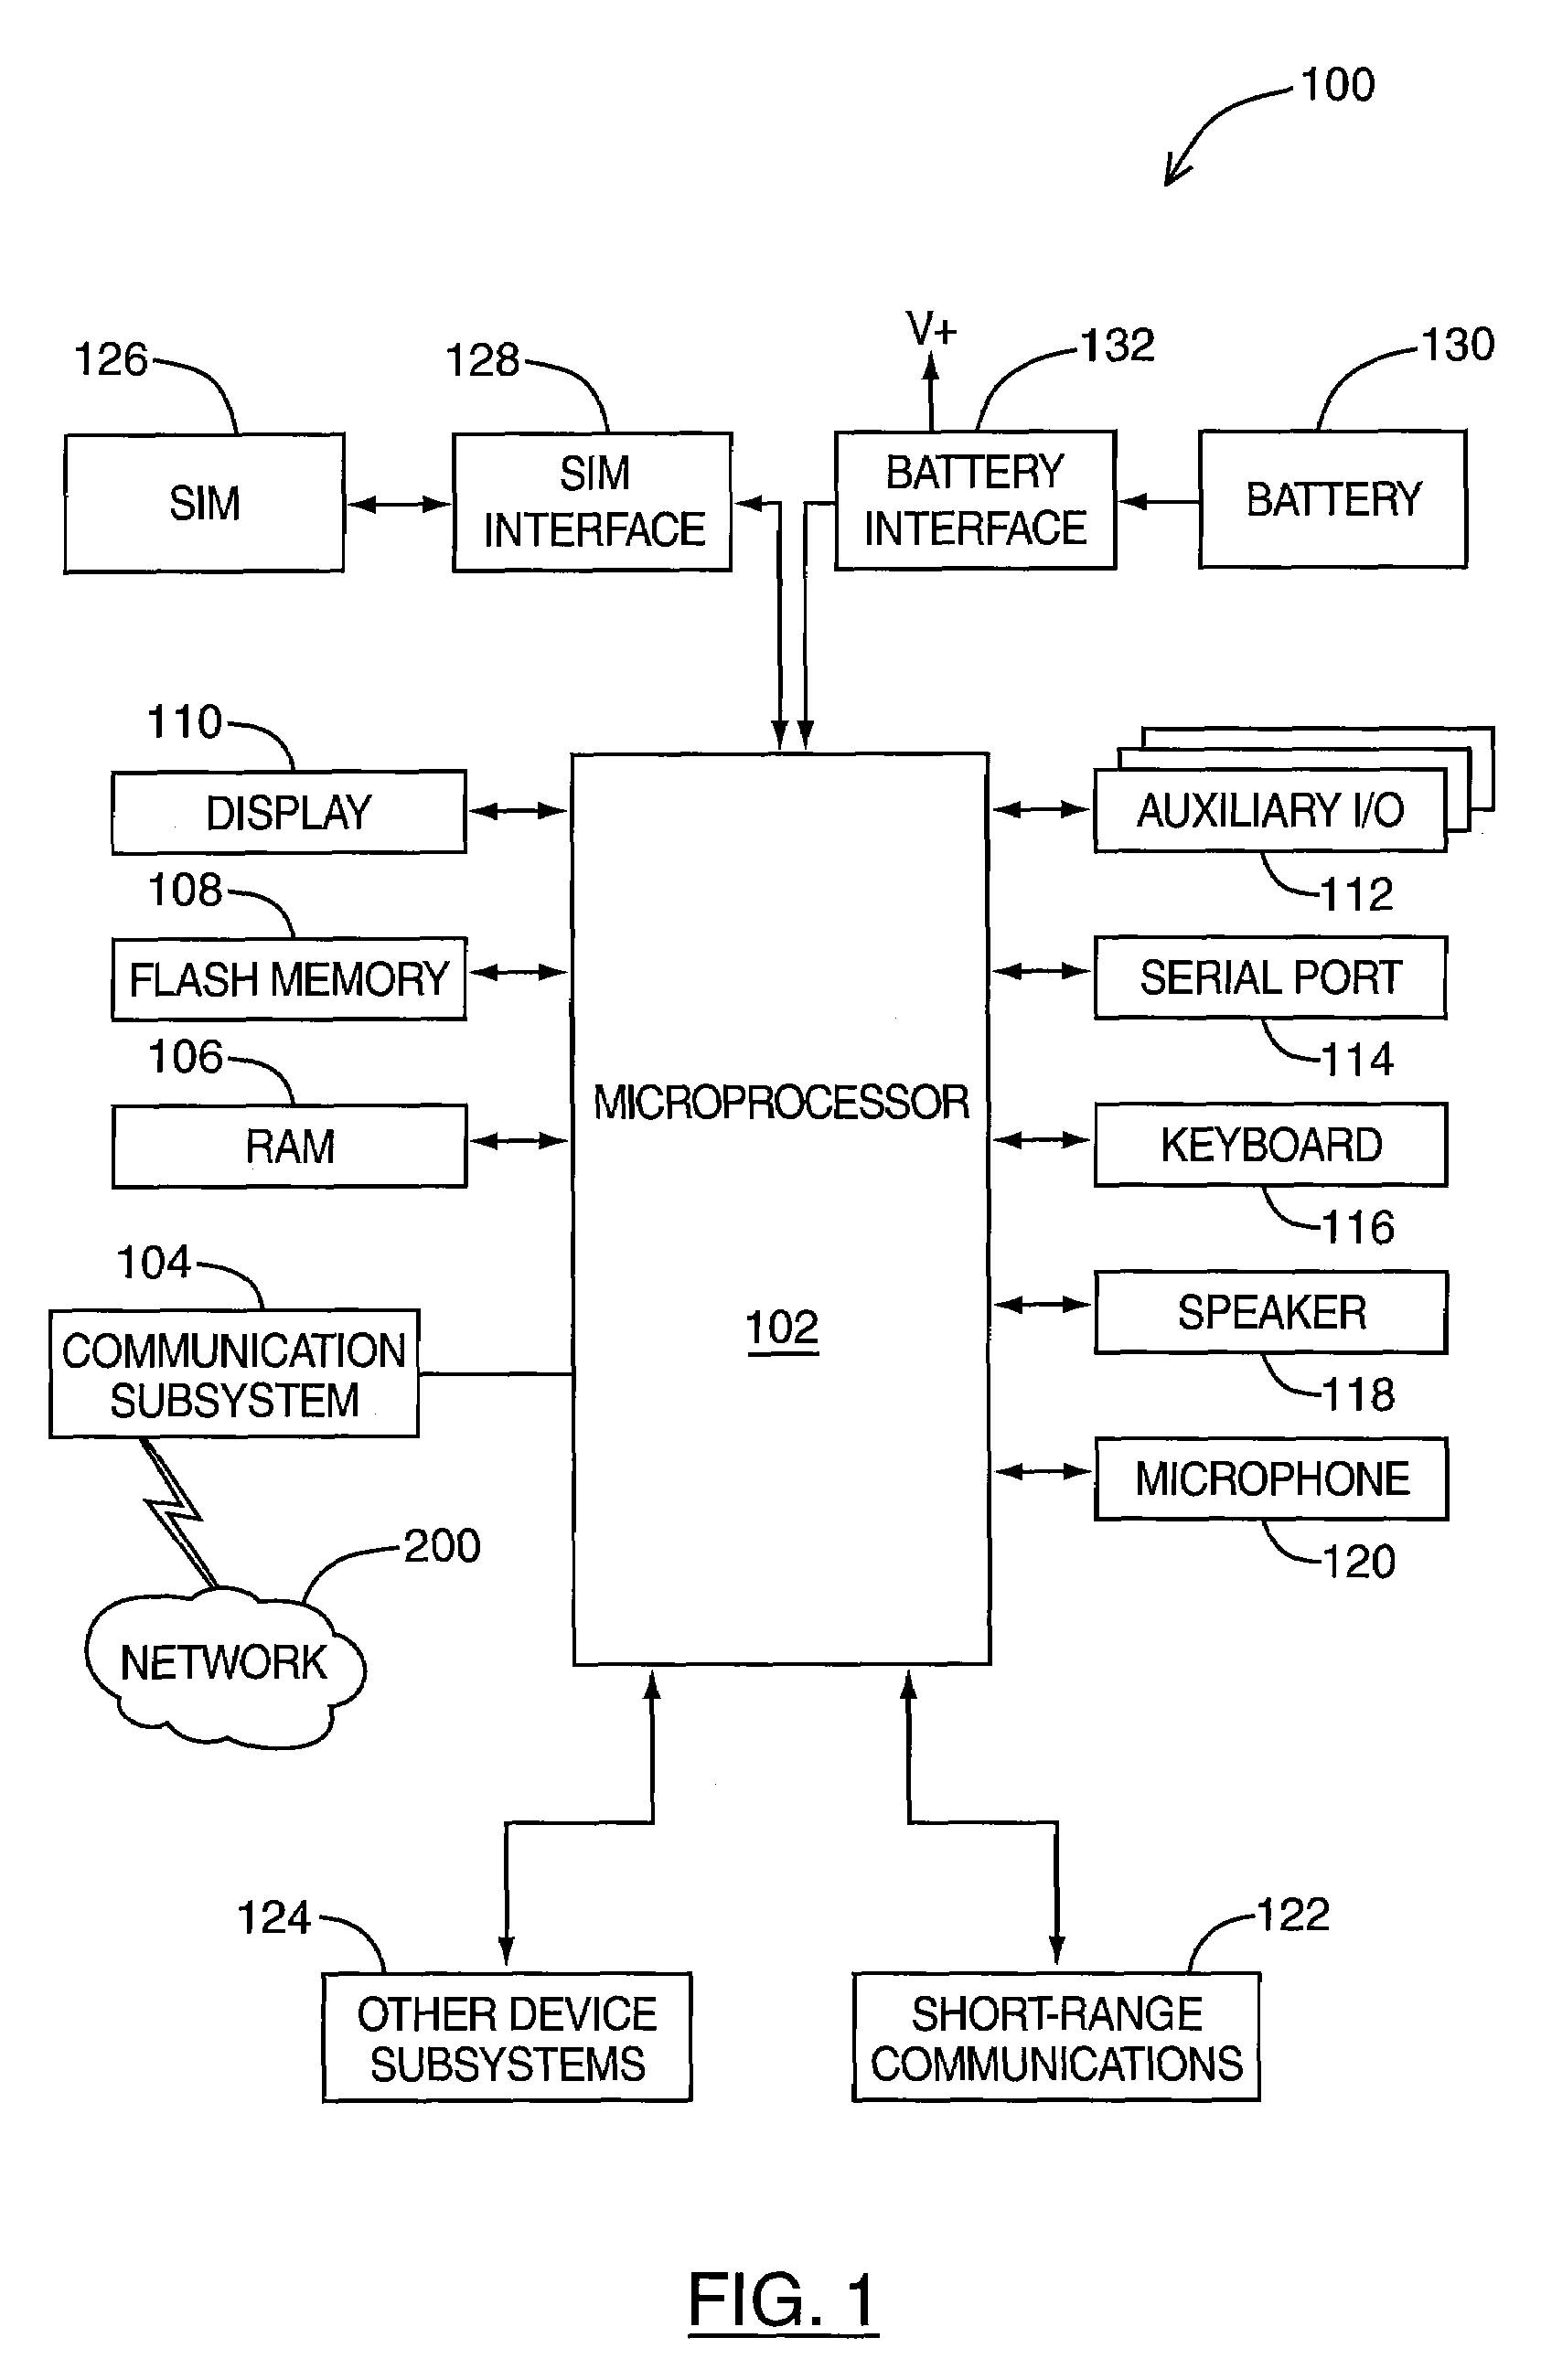 Apparatus and method for integrating authentication protocols in the establishment of connections between computing devices